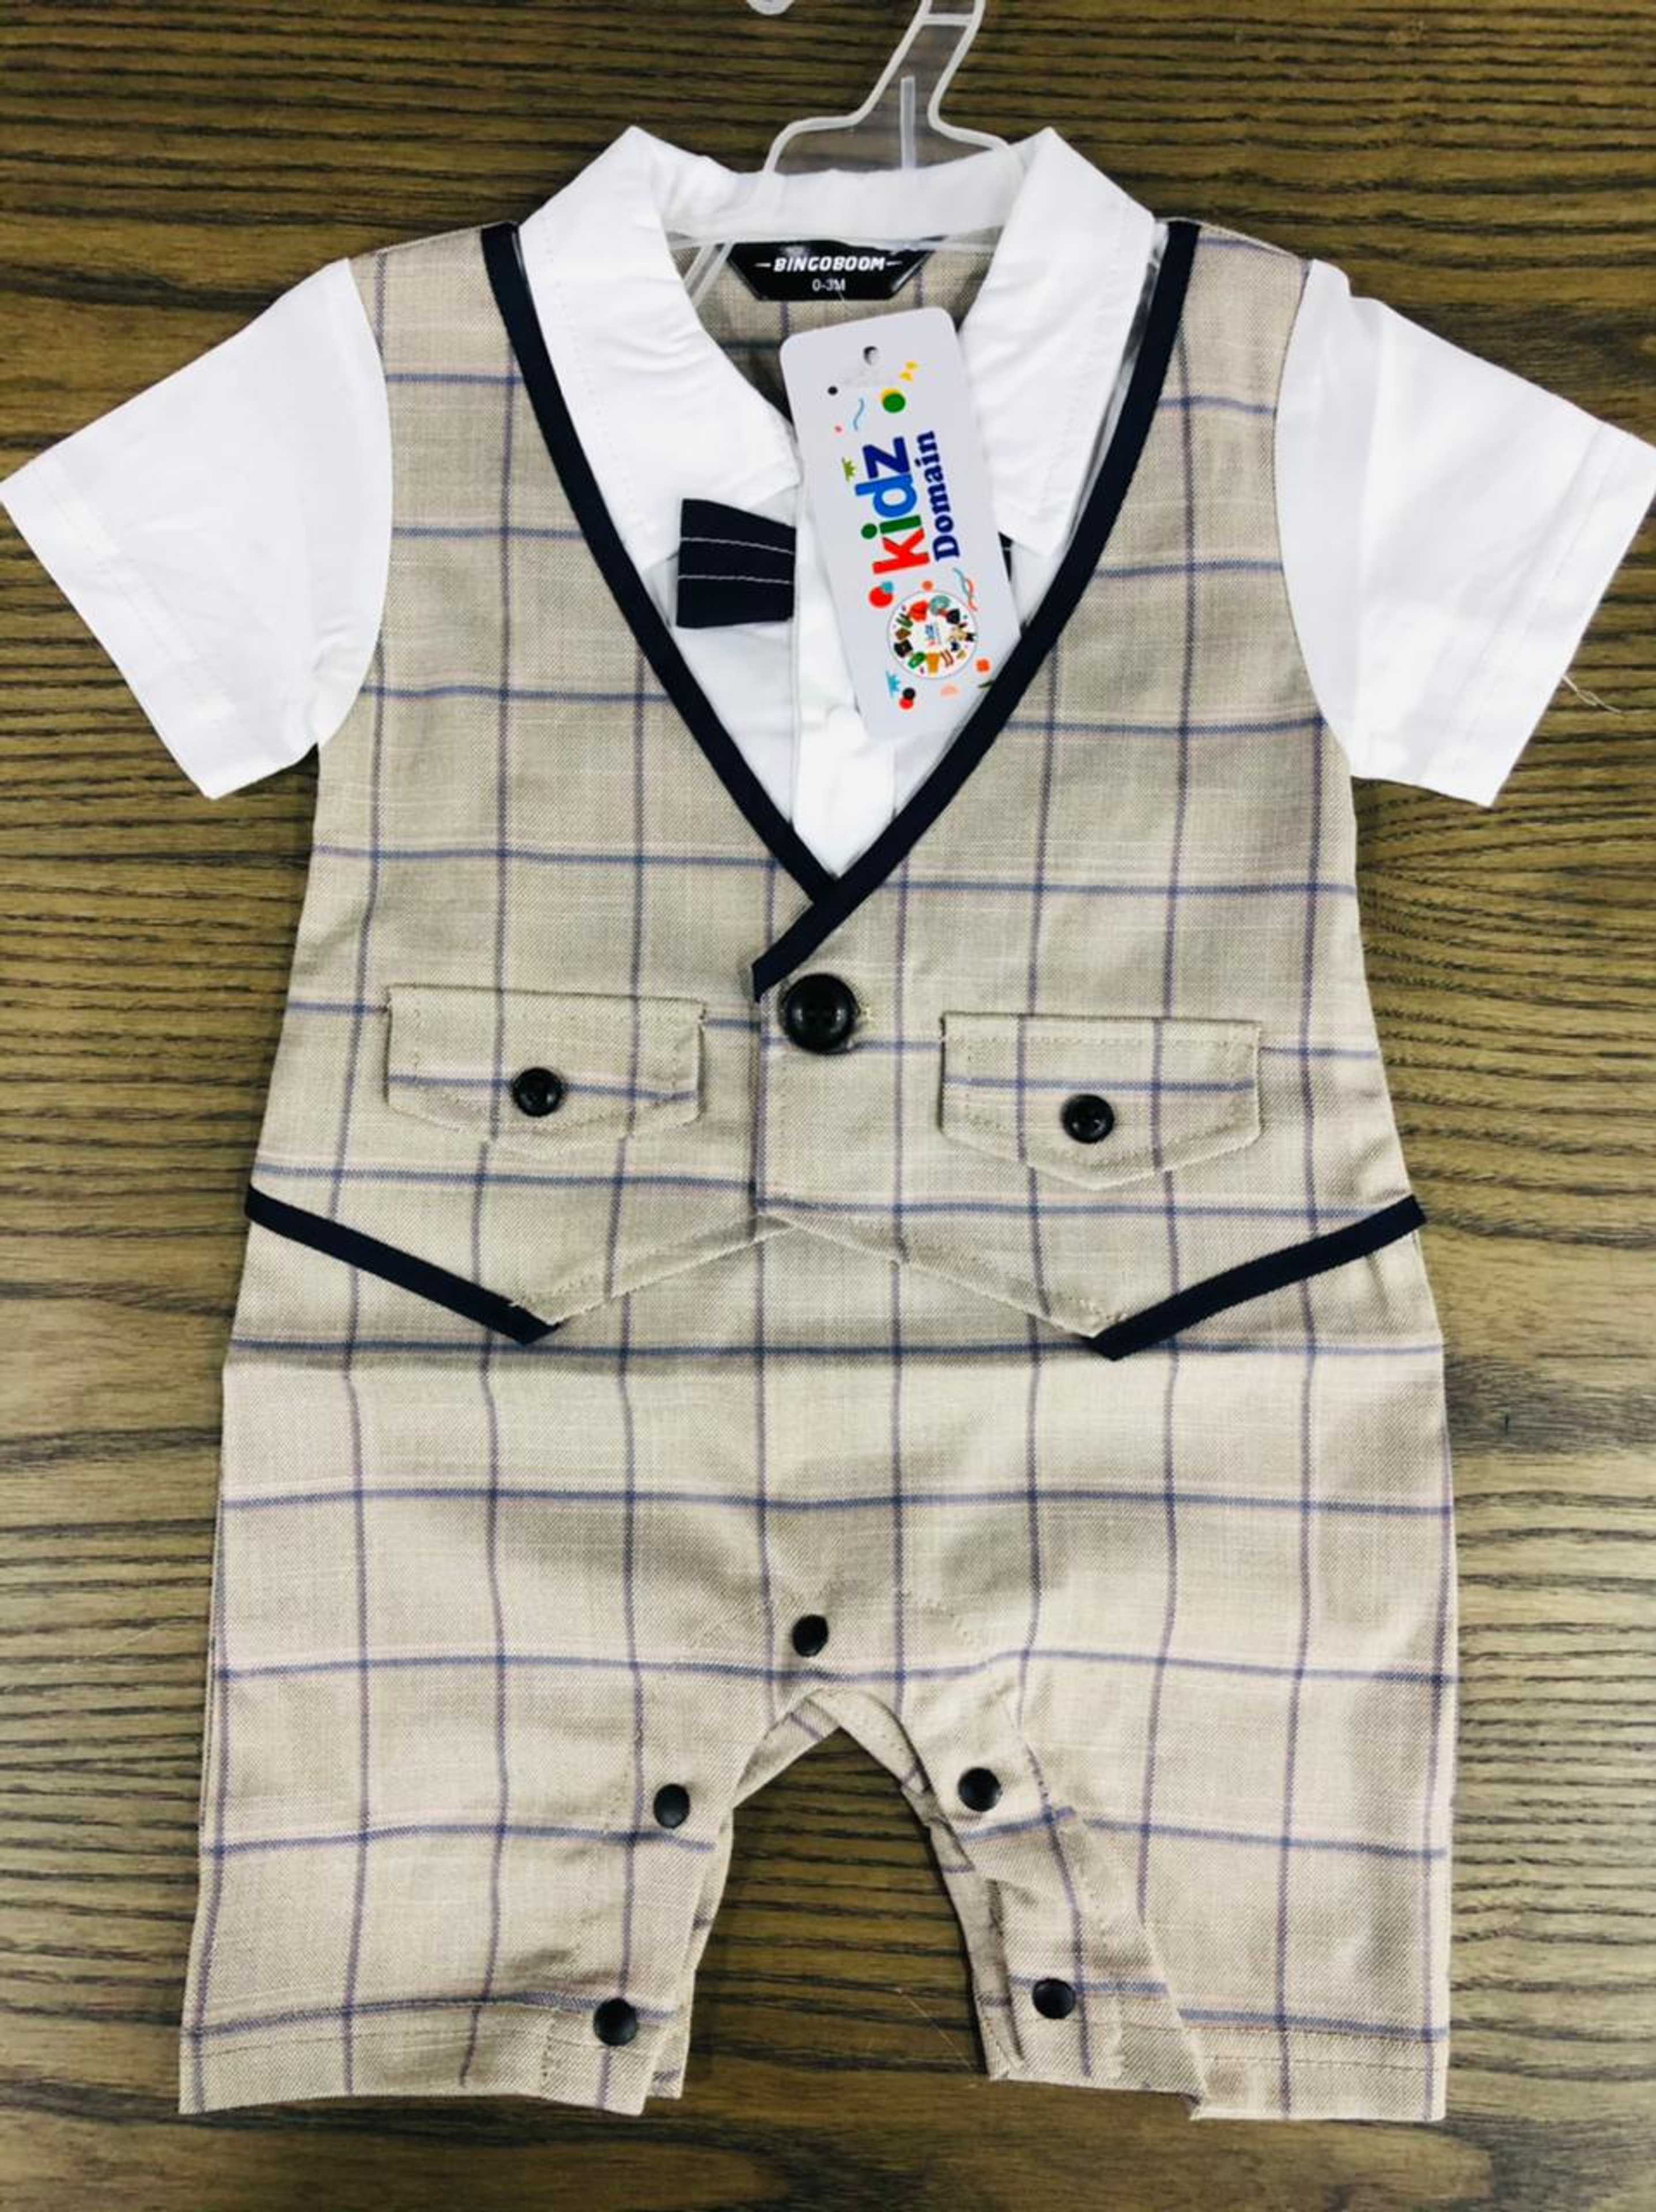 white and skin baba romper suit check style